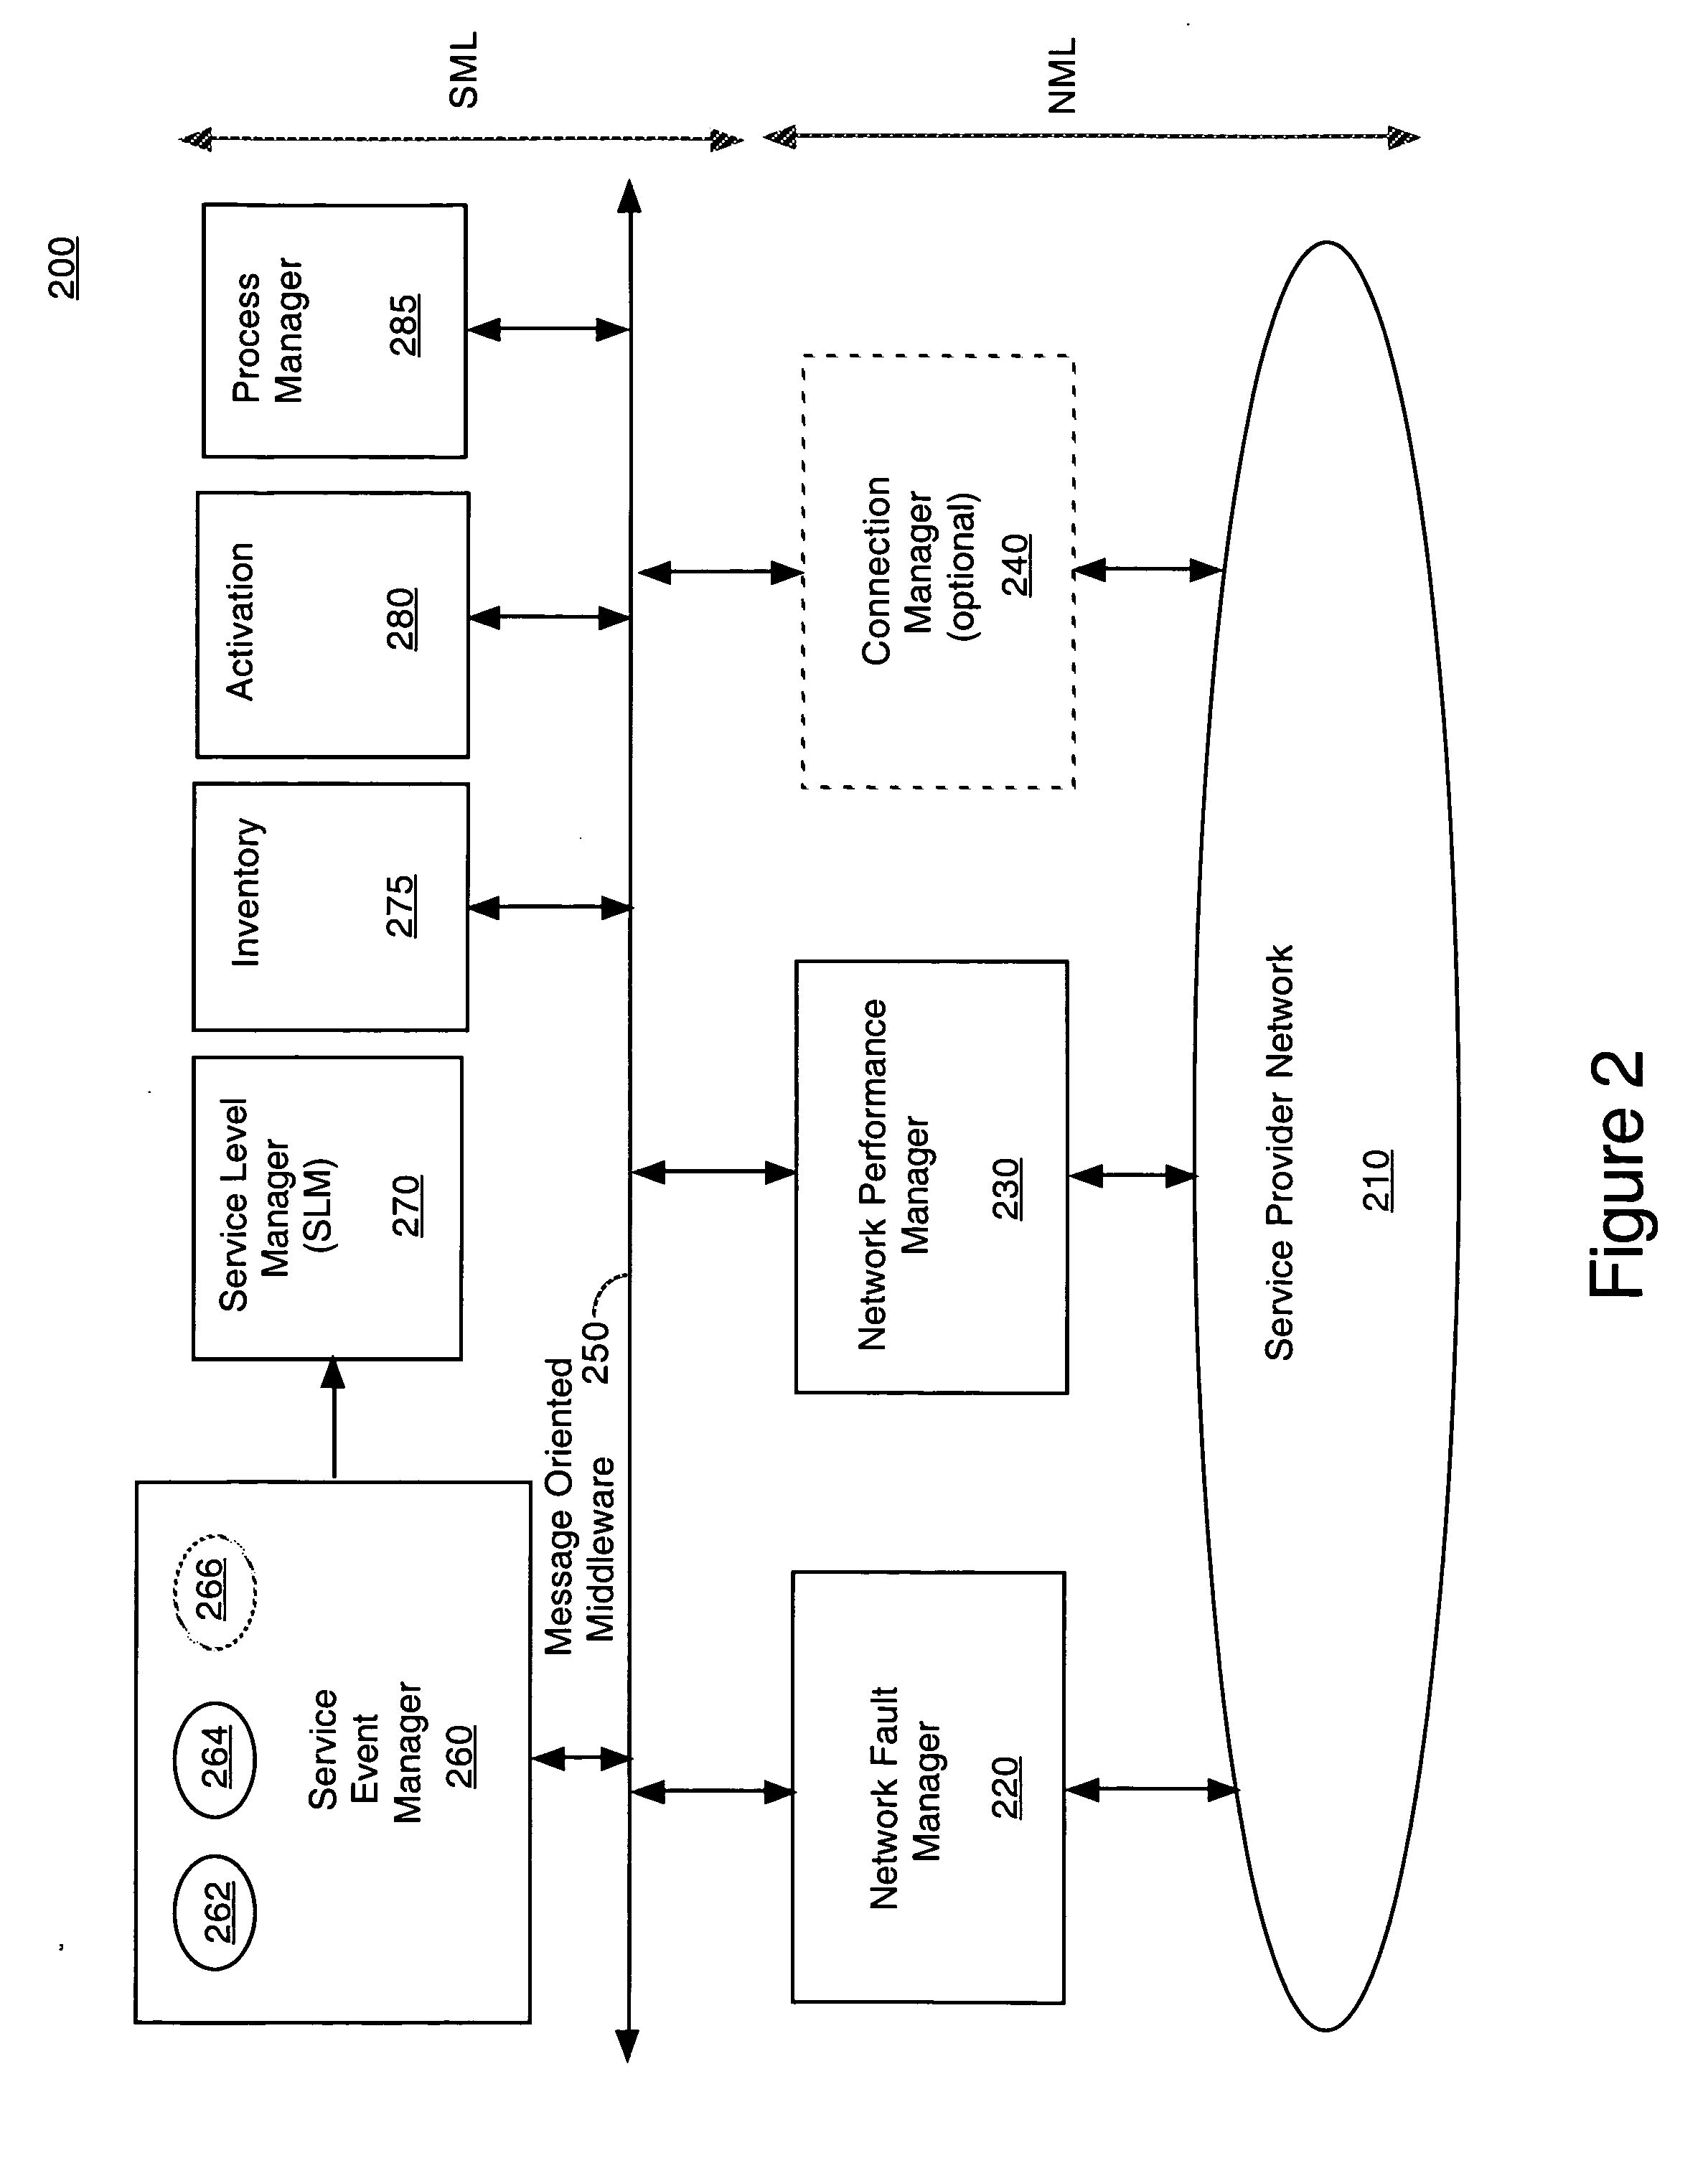 System and method for end-to-end management of service level events